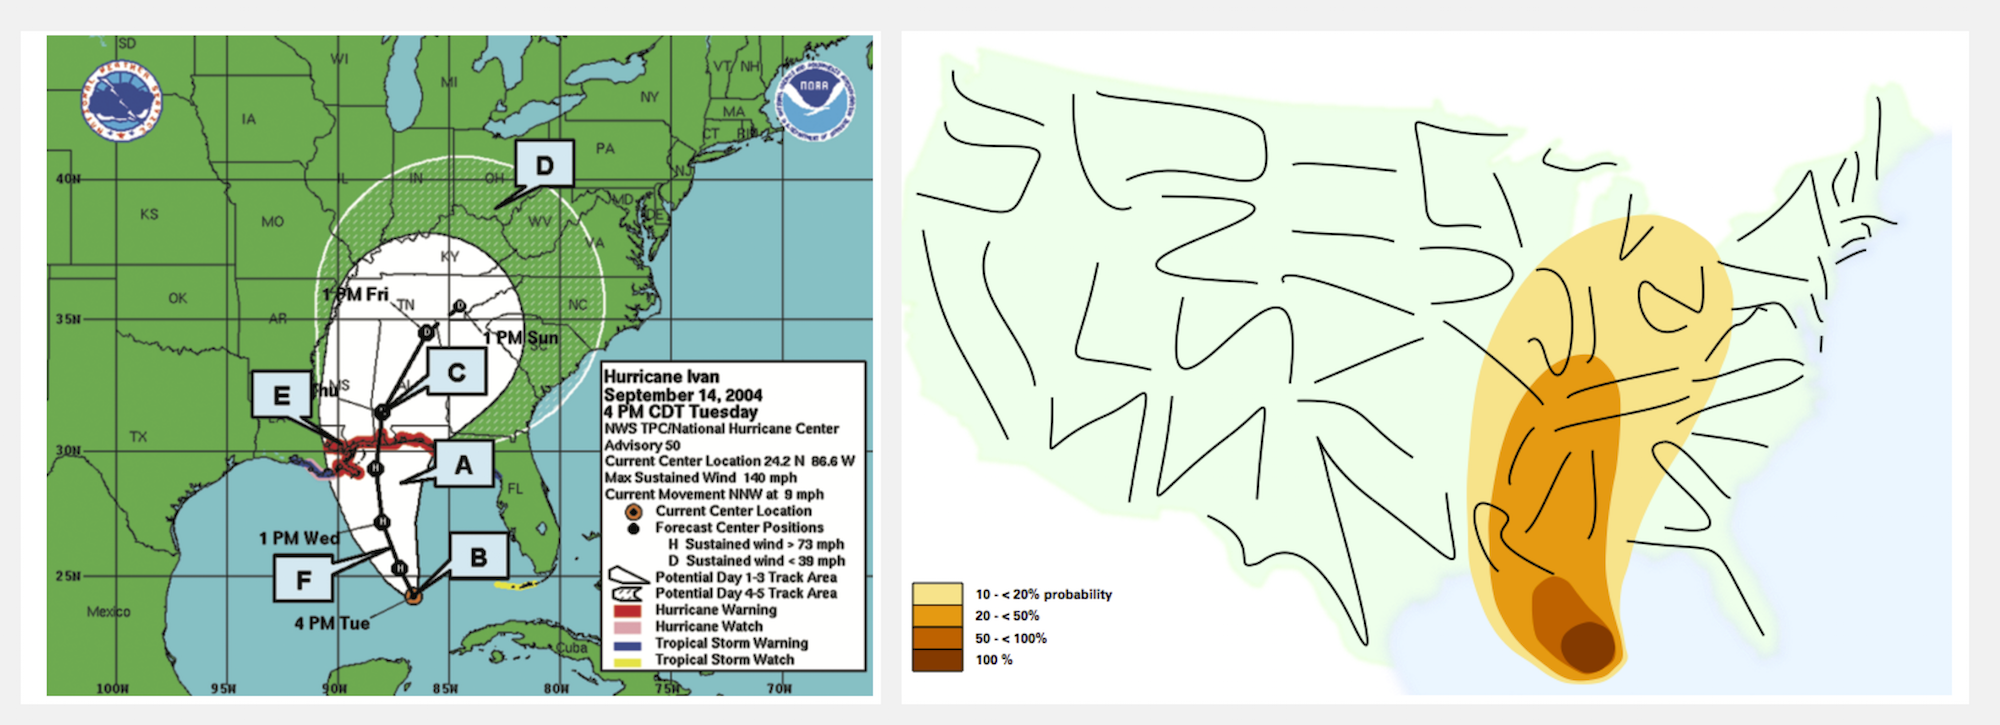 *Cone of Uncertainty* produced by [National Hurricane Center](https://www.nhc.noaa.gov/refresh/graphics_at1+shtml/030119.shtml?cone#contents) and example re-design by [Jo Wood](https://www.gicentre.net/jwo/index).